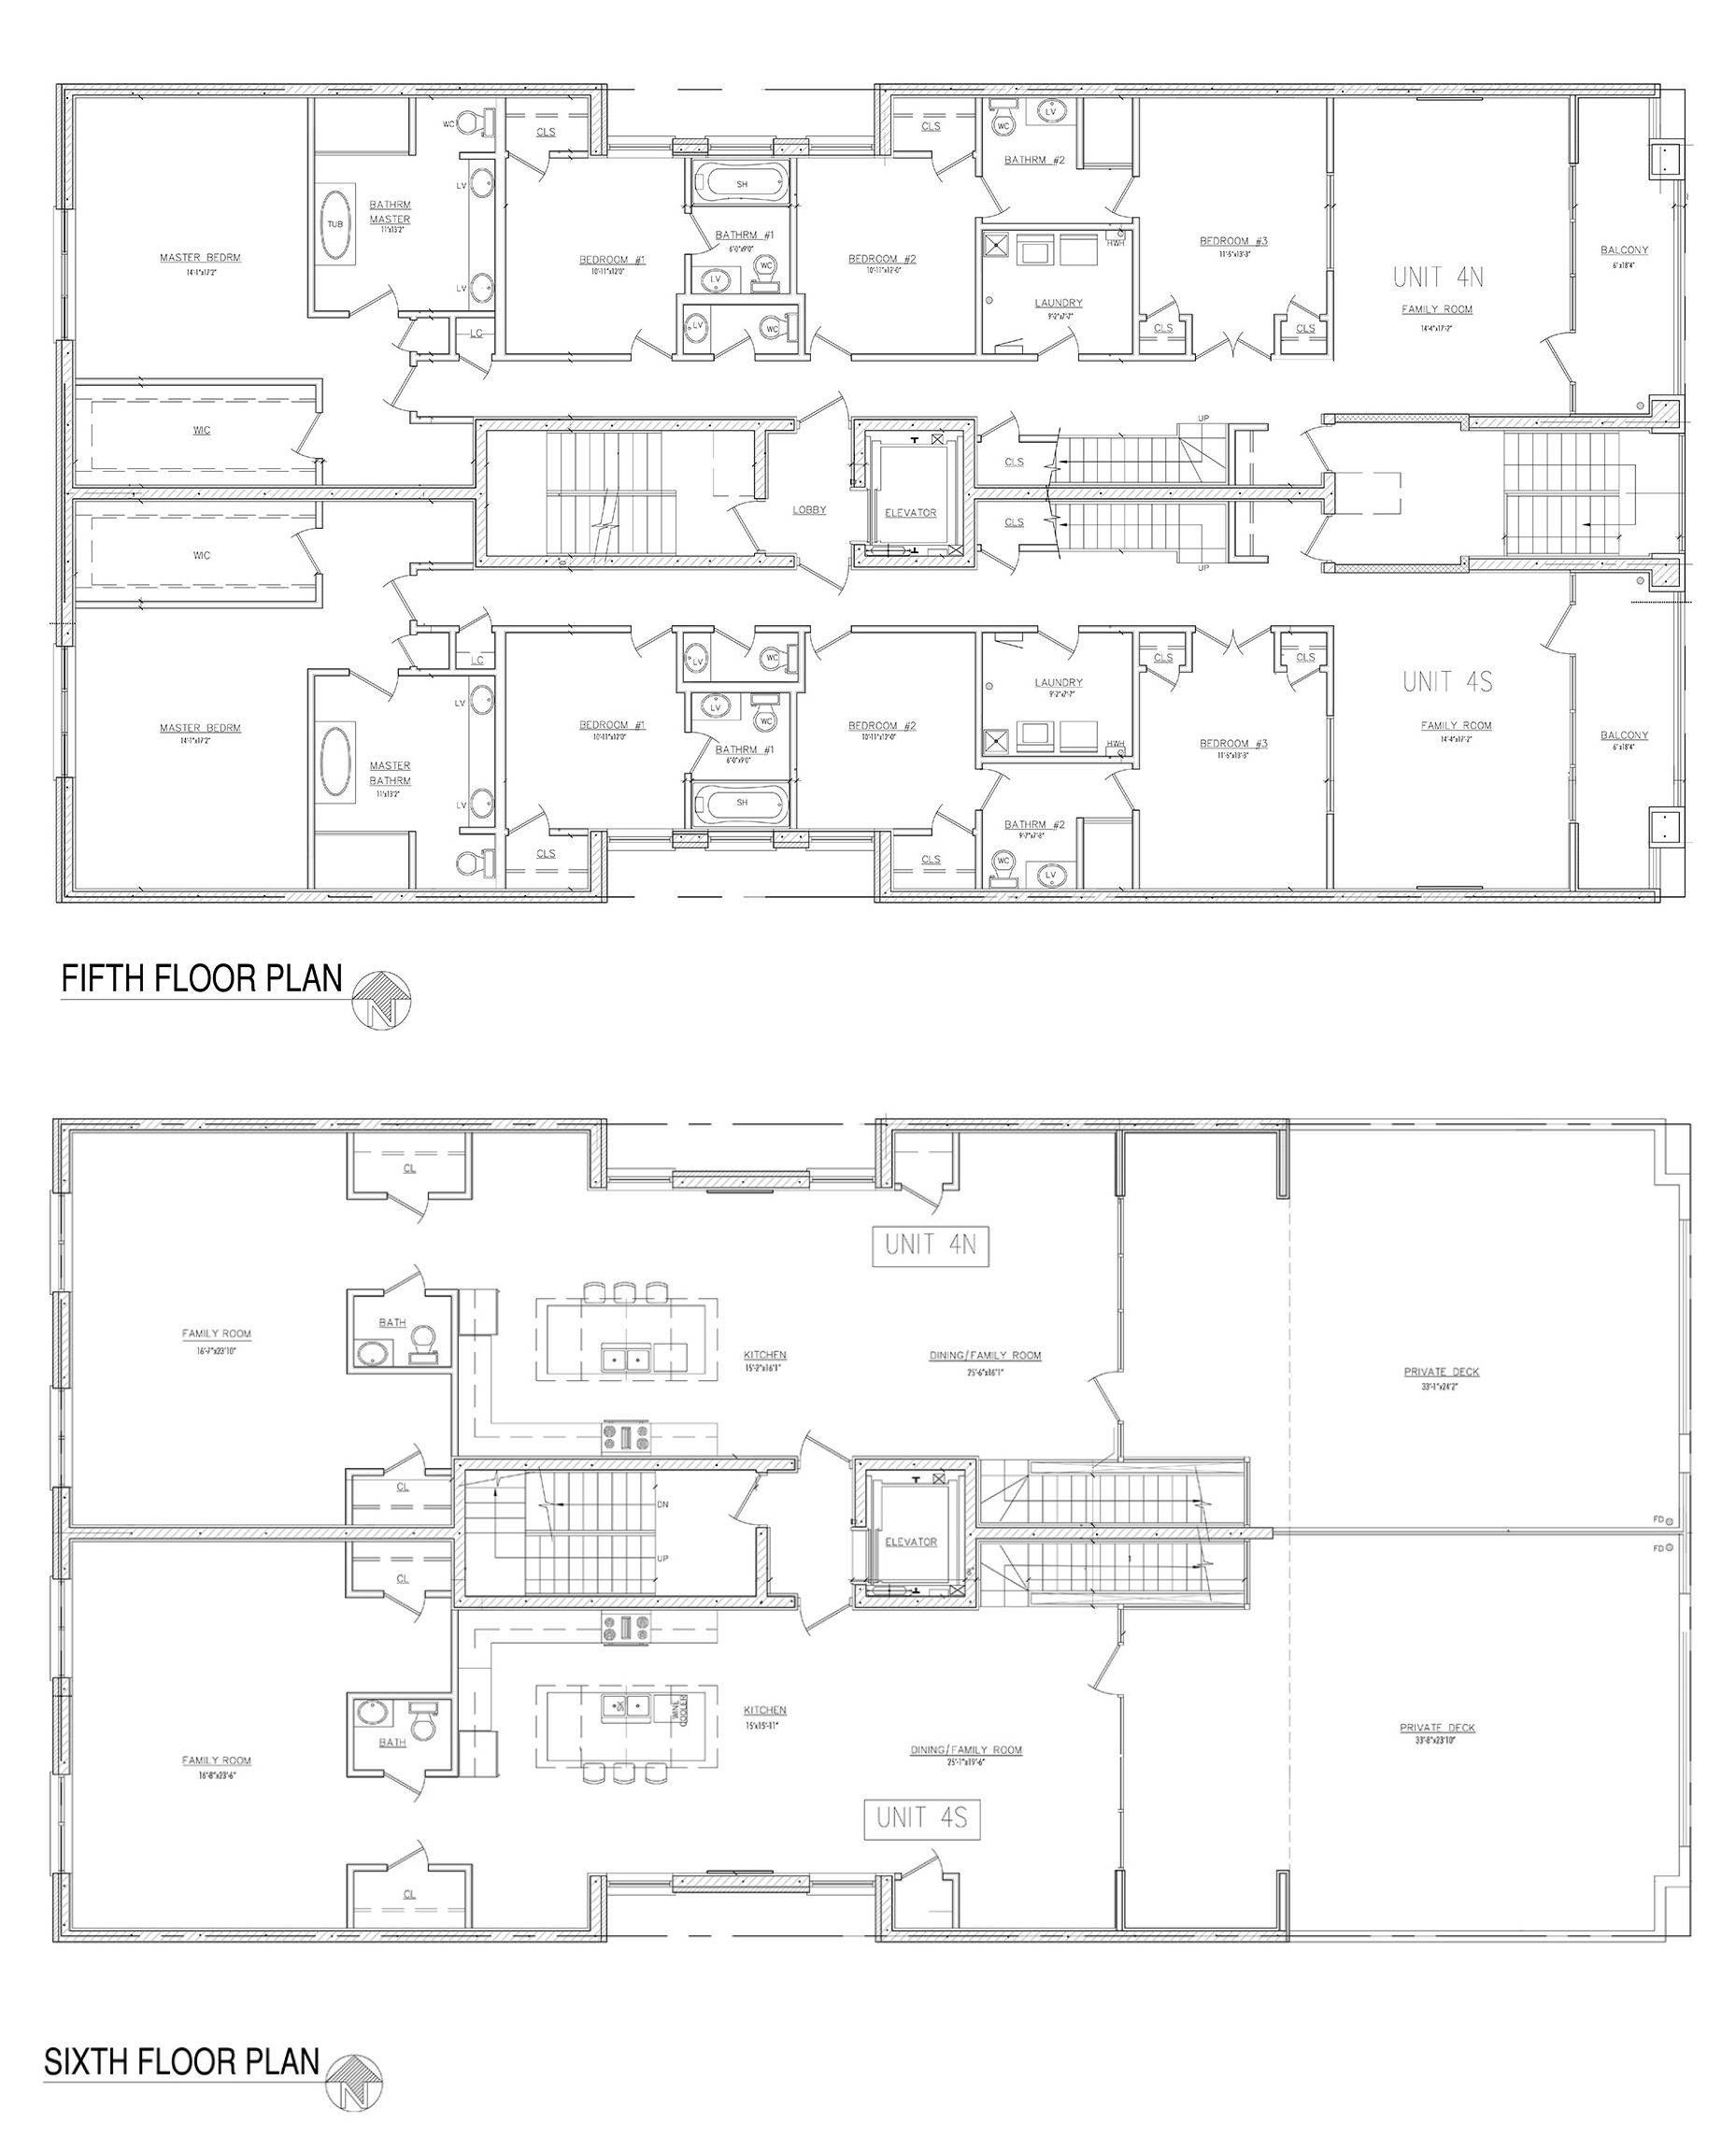 West Loop Collection's penthouse floor plans